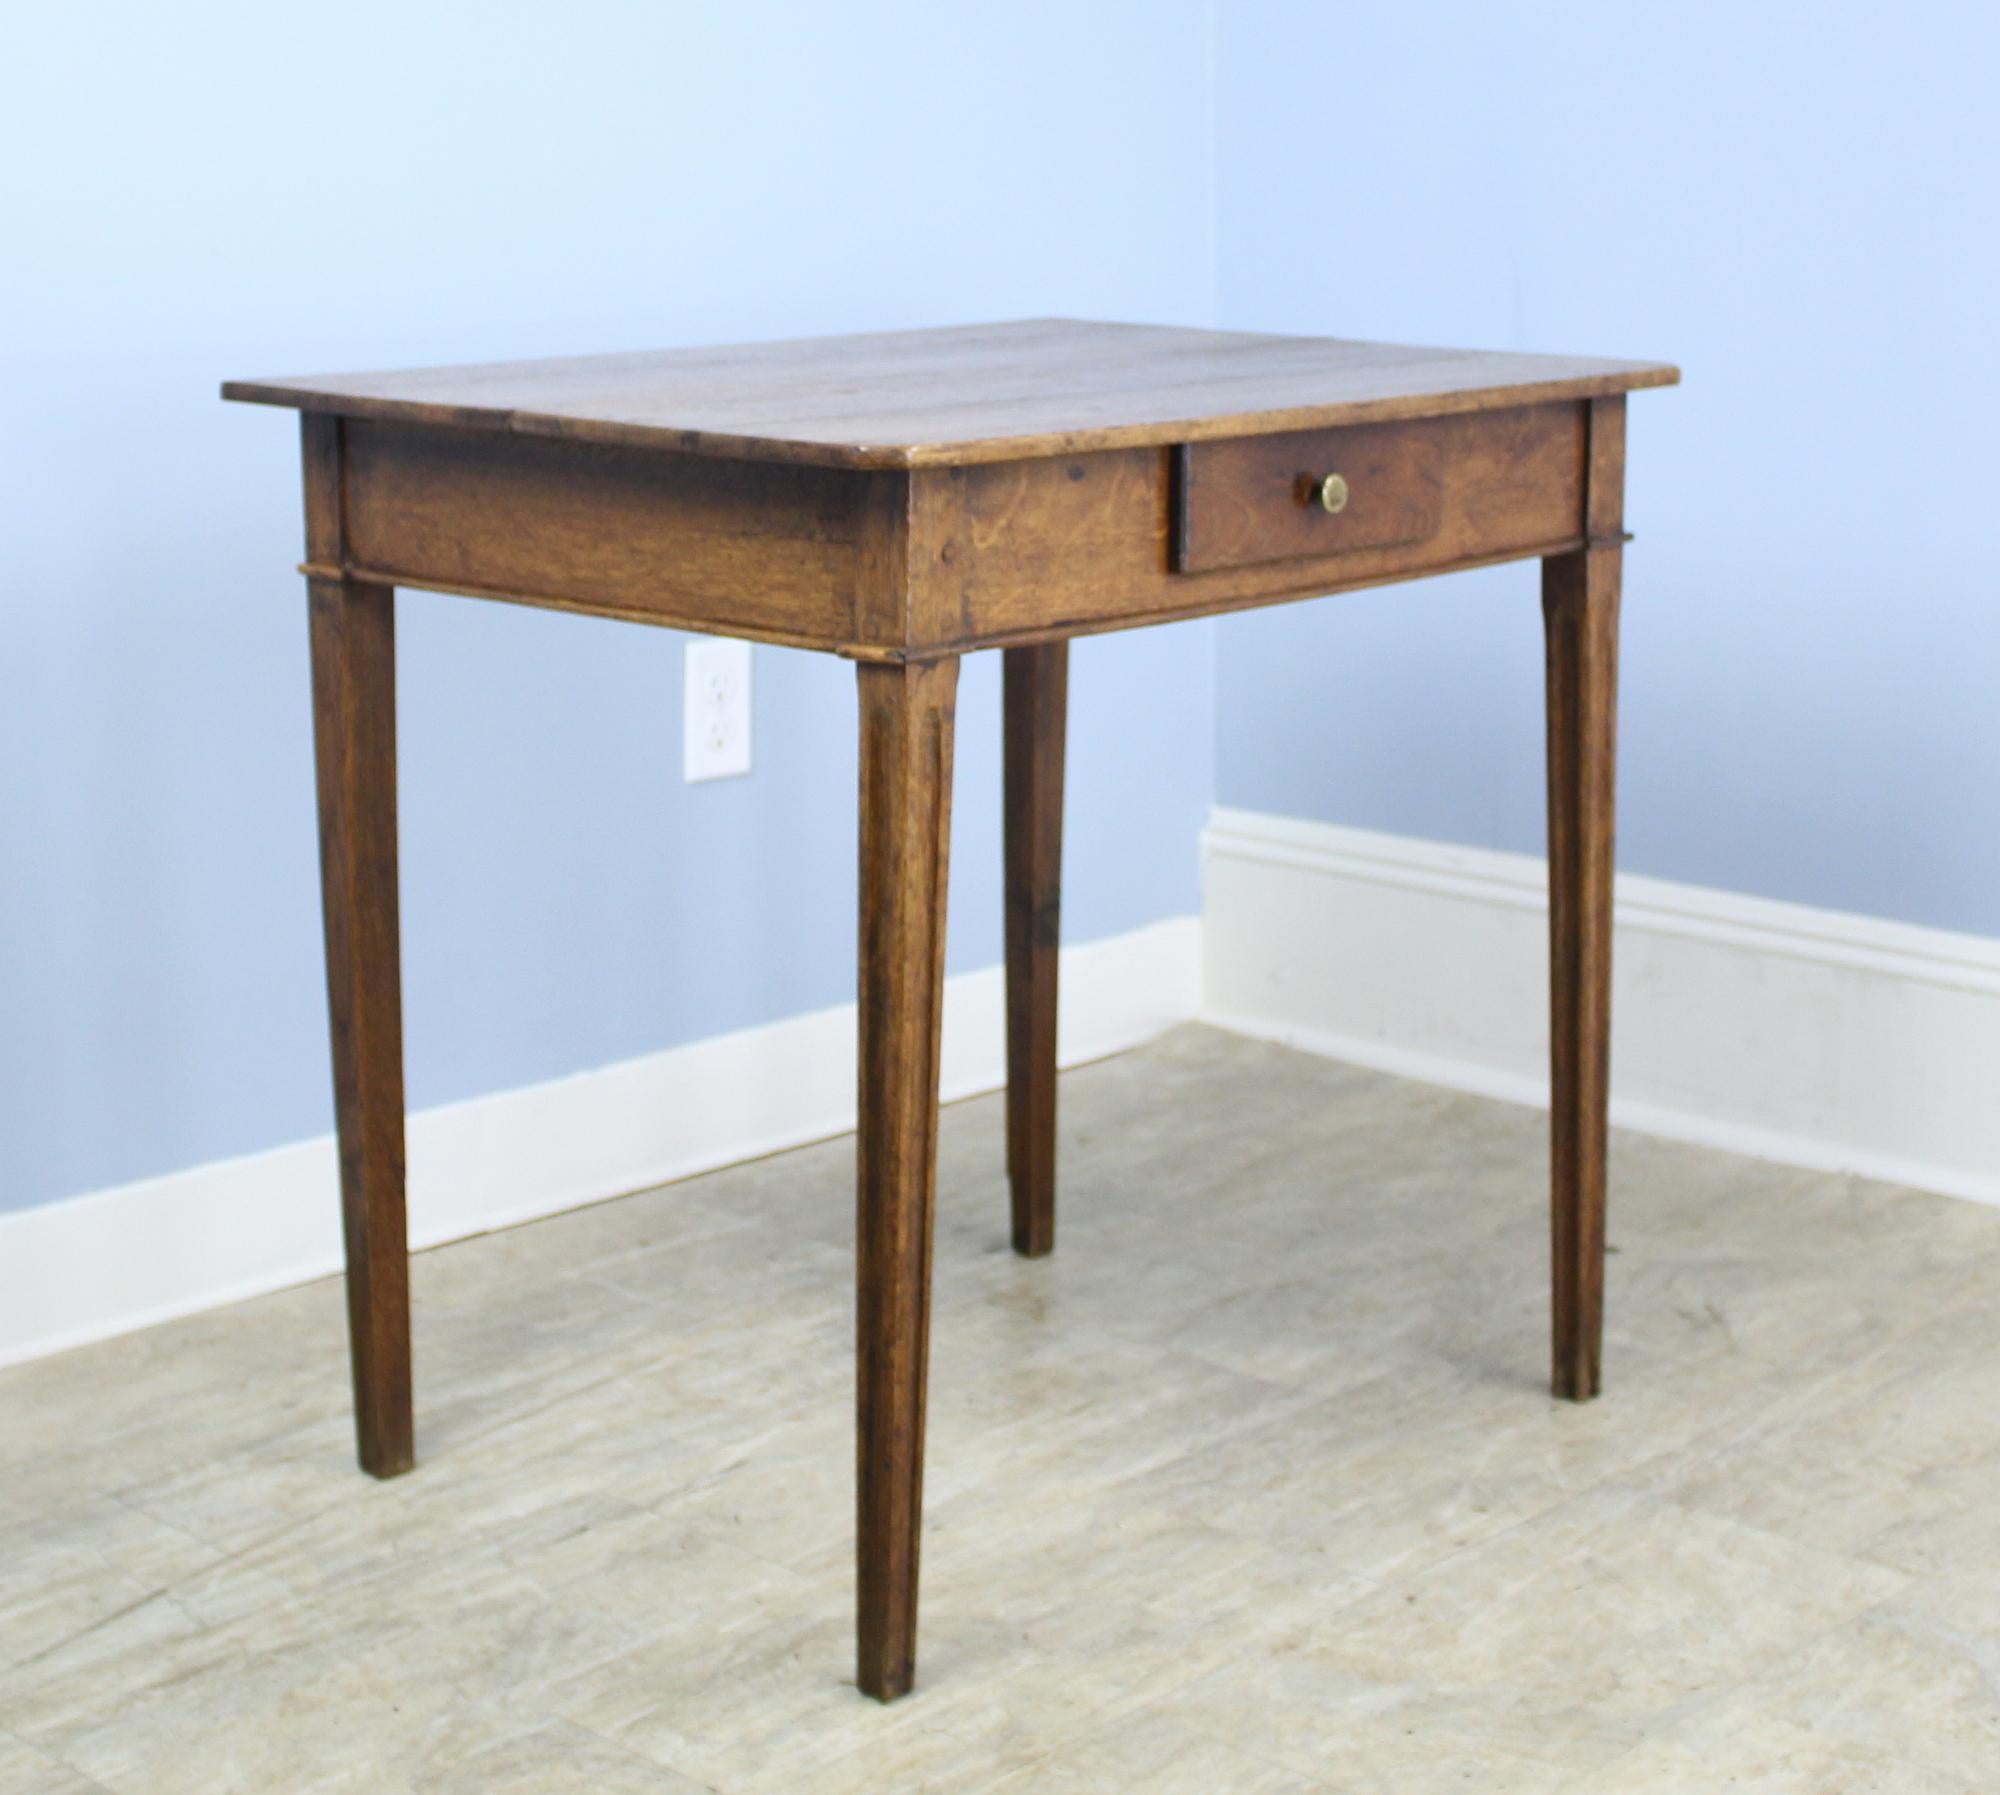 A handsome oak side table with canted corners, reeded legs and fine grain. Single drawer and carved detail at each corner complete the look. There is a slight warp to the front right leg which does not affect the stability of the table. No wobble.